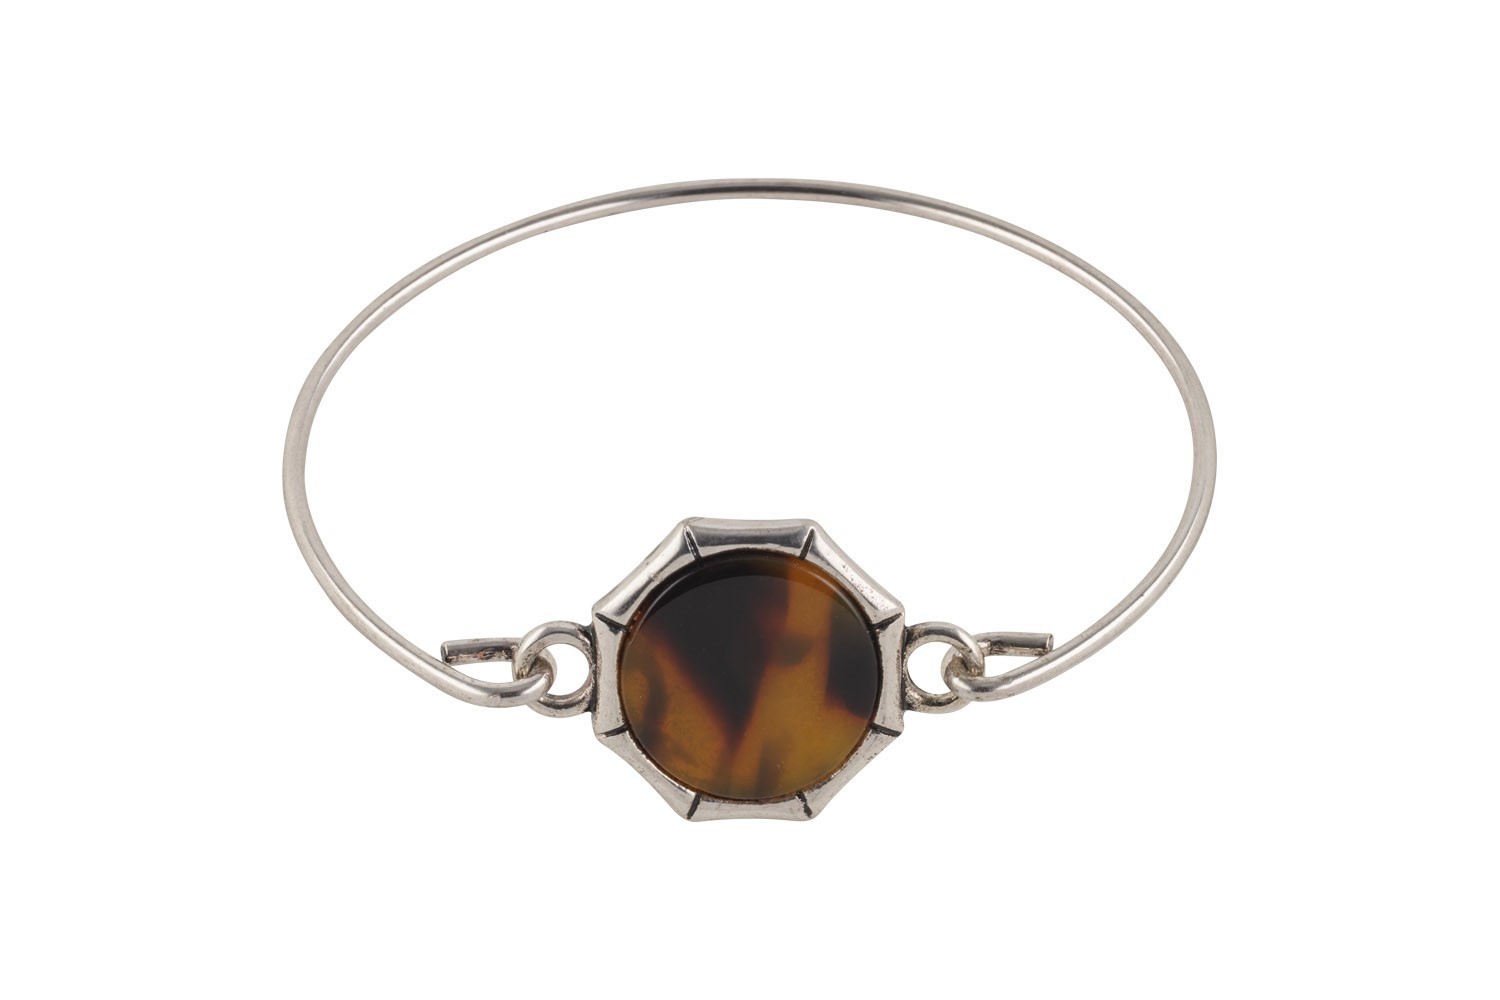 Bangle Bracelet with Tortoiseshell Accent with Silver Finish